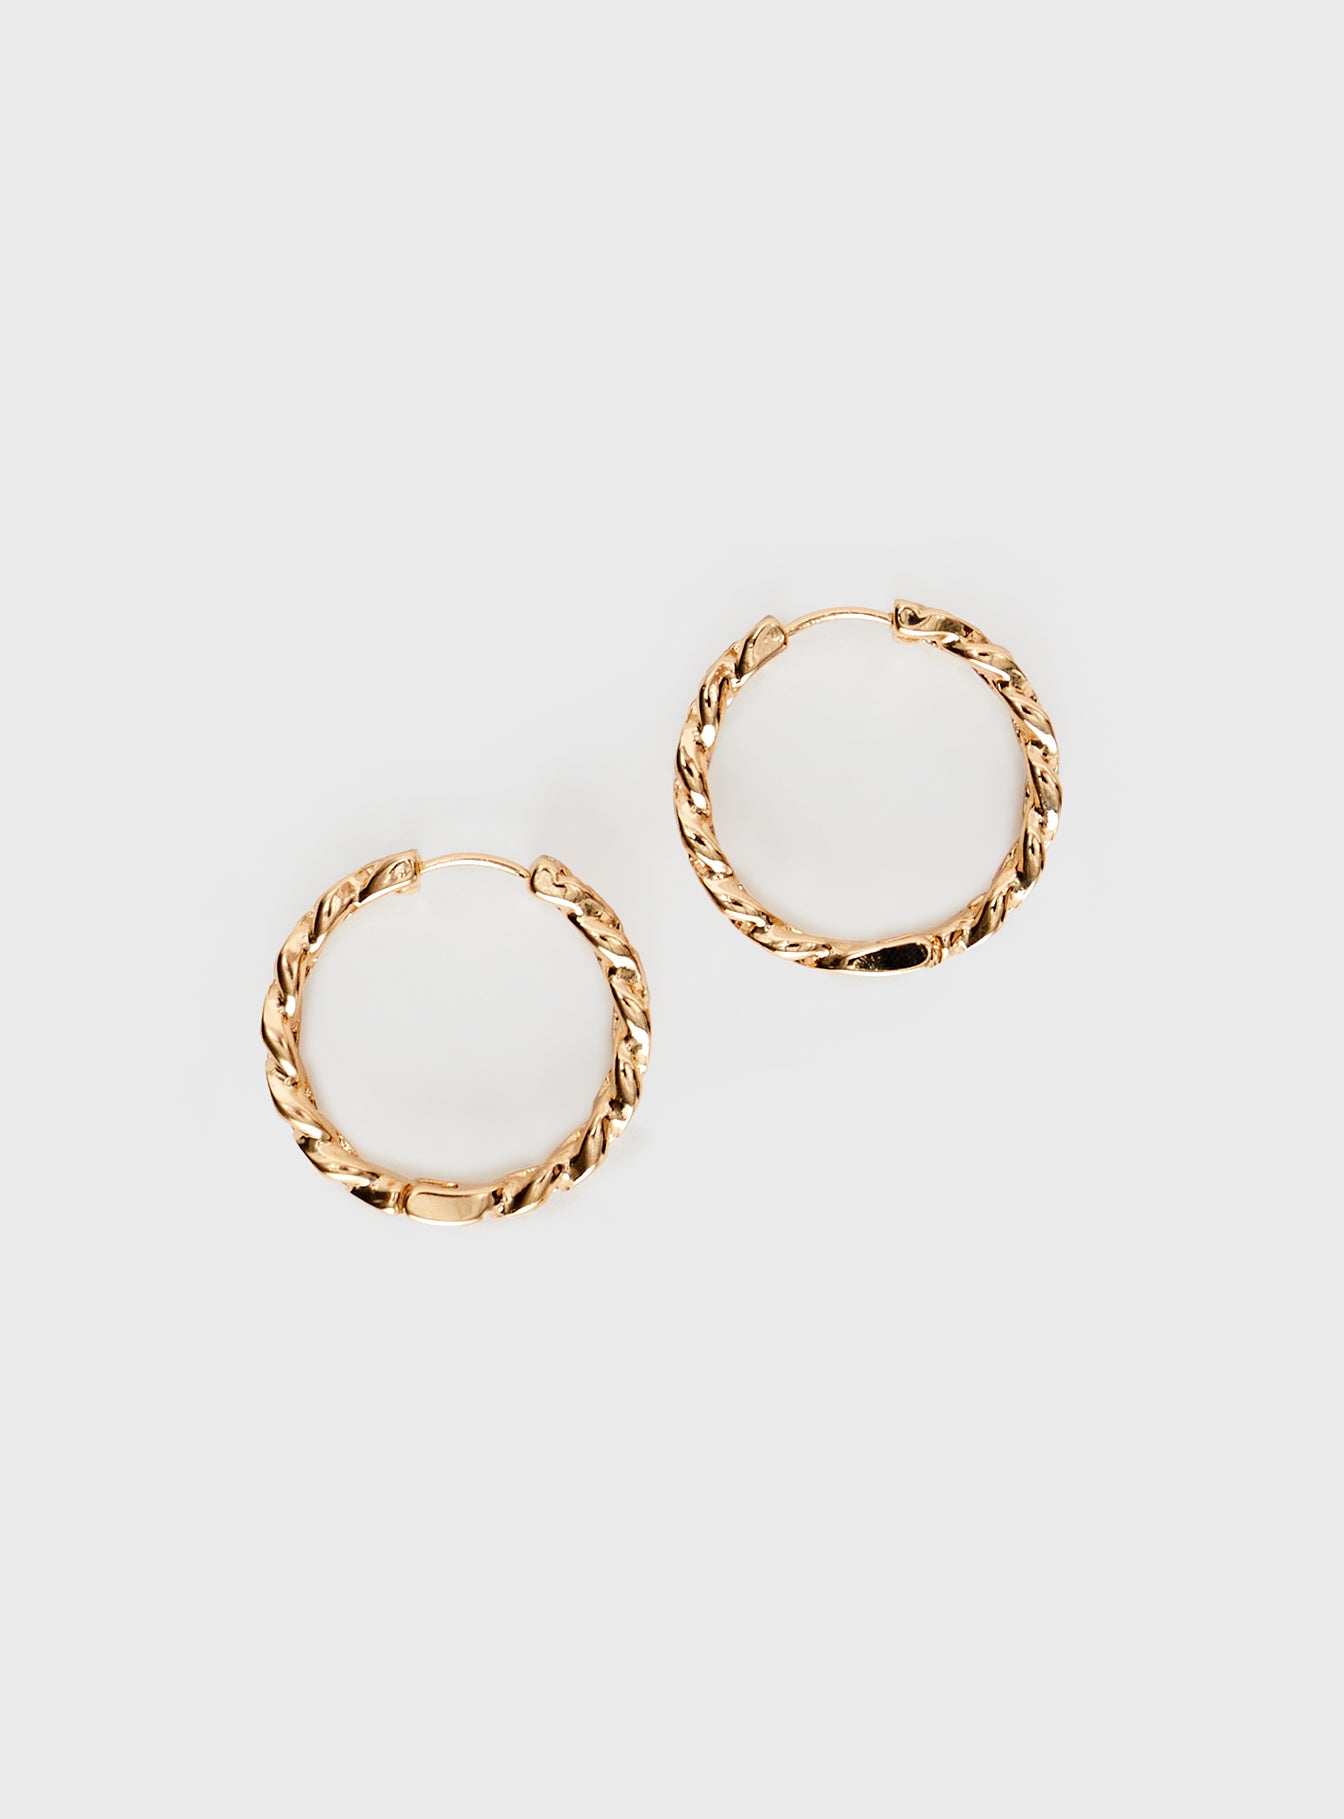 Buy 18kt Yellow Fine Gold Handmade Customized Hoops Earring, Excellent  Brides Made Clip on Earring, Huggie Hoop Earrings Jewelry Ho65 Online in  India - Etsy